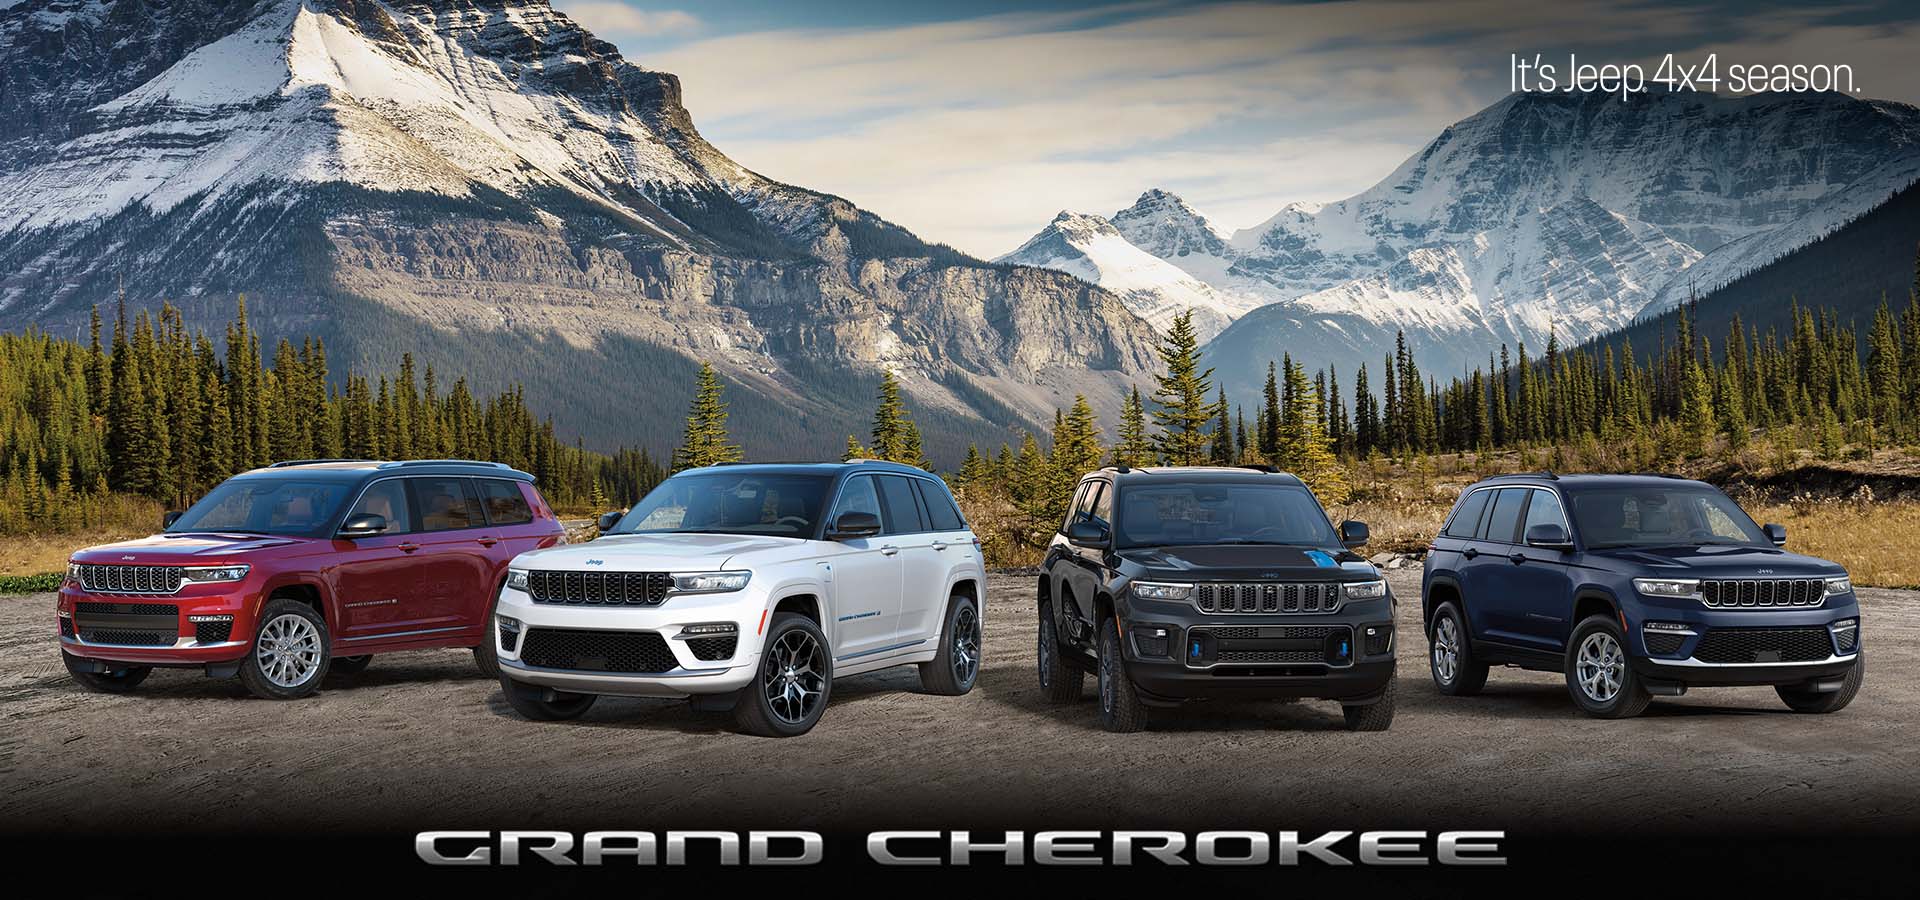 A lineup of four Jeep Grand Cherokee models parked on a clearing with snow-capped mountains in the background. From left to right: a red Grand Cherokee Summit, white Grand Cherokee Summit Reserve 4xe, black Grand Cherokee Trailhawk 4xe and blue Grand Cherokee Limited. The It's Jeep Season logo.